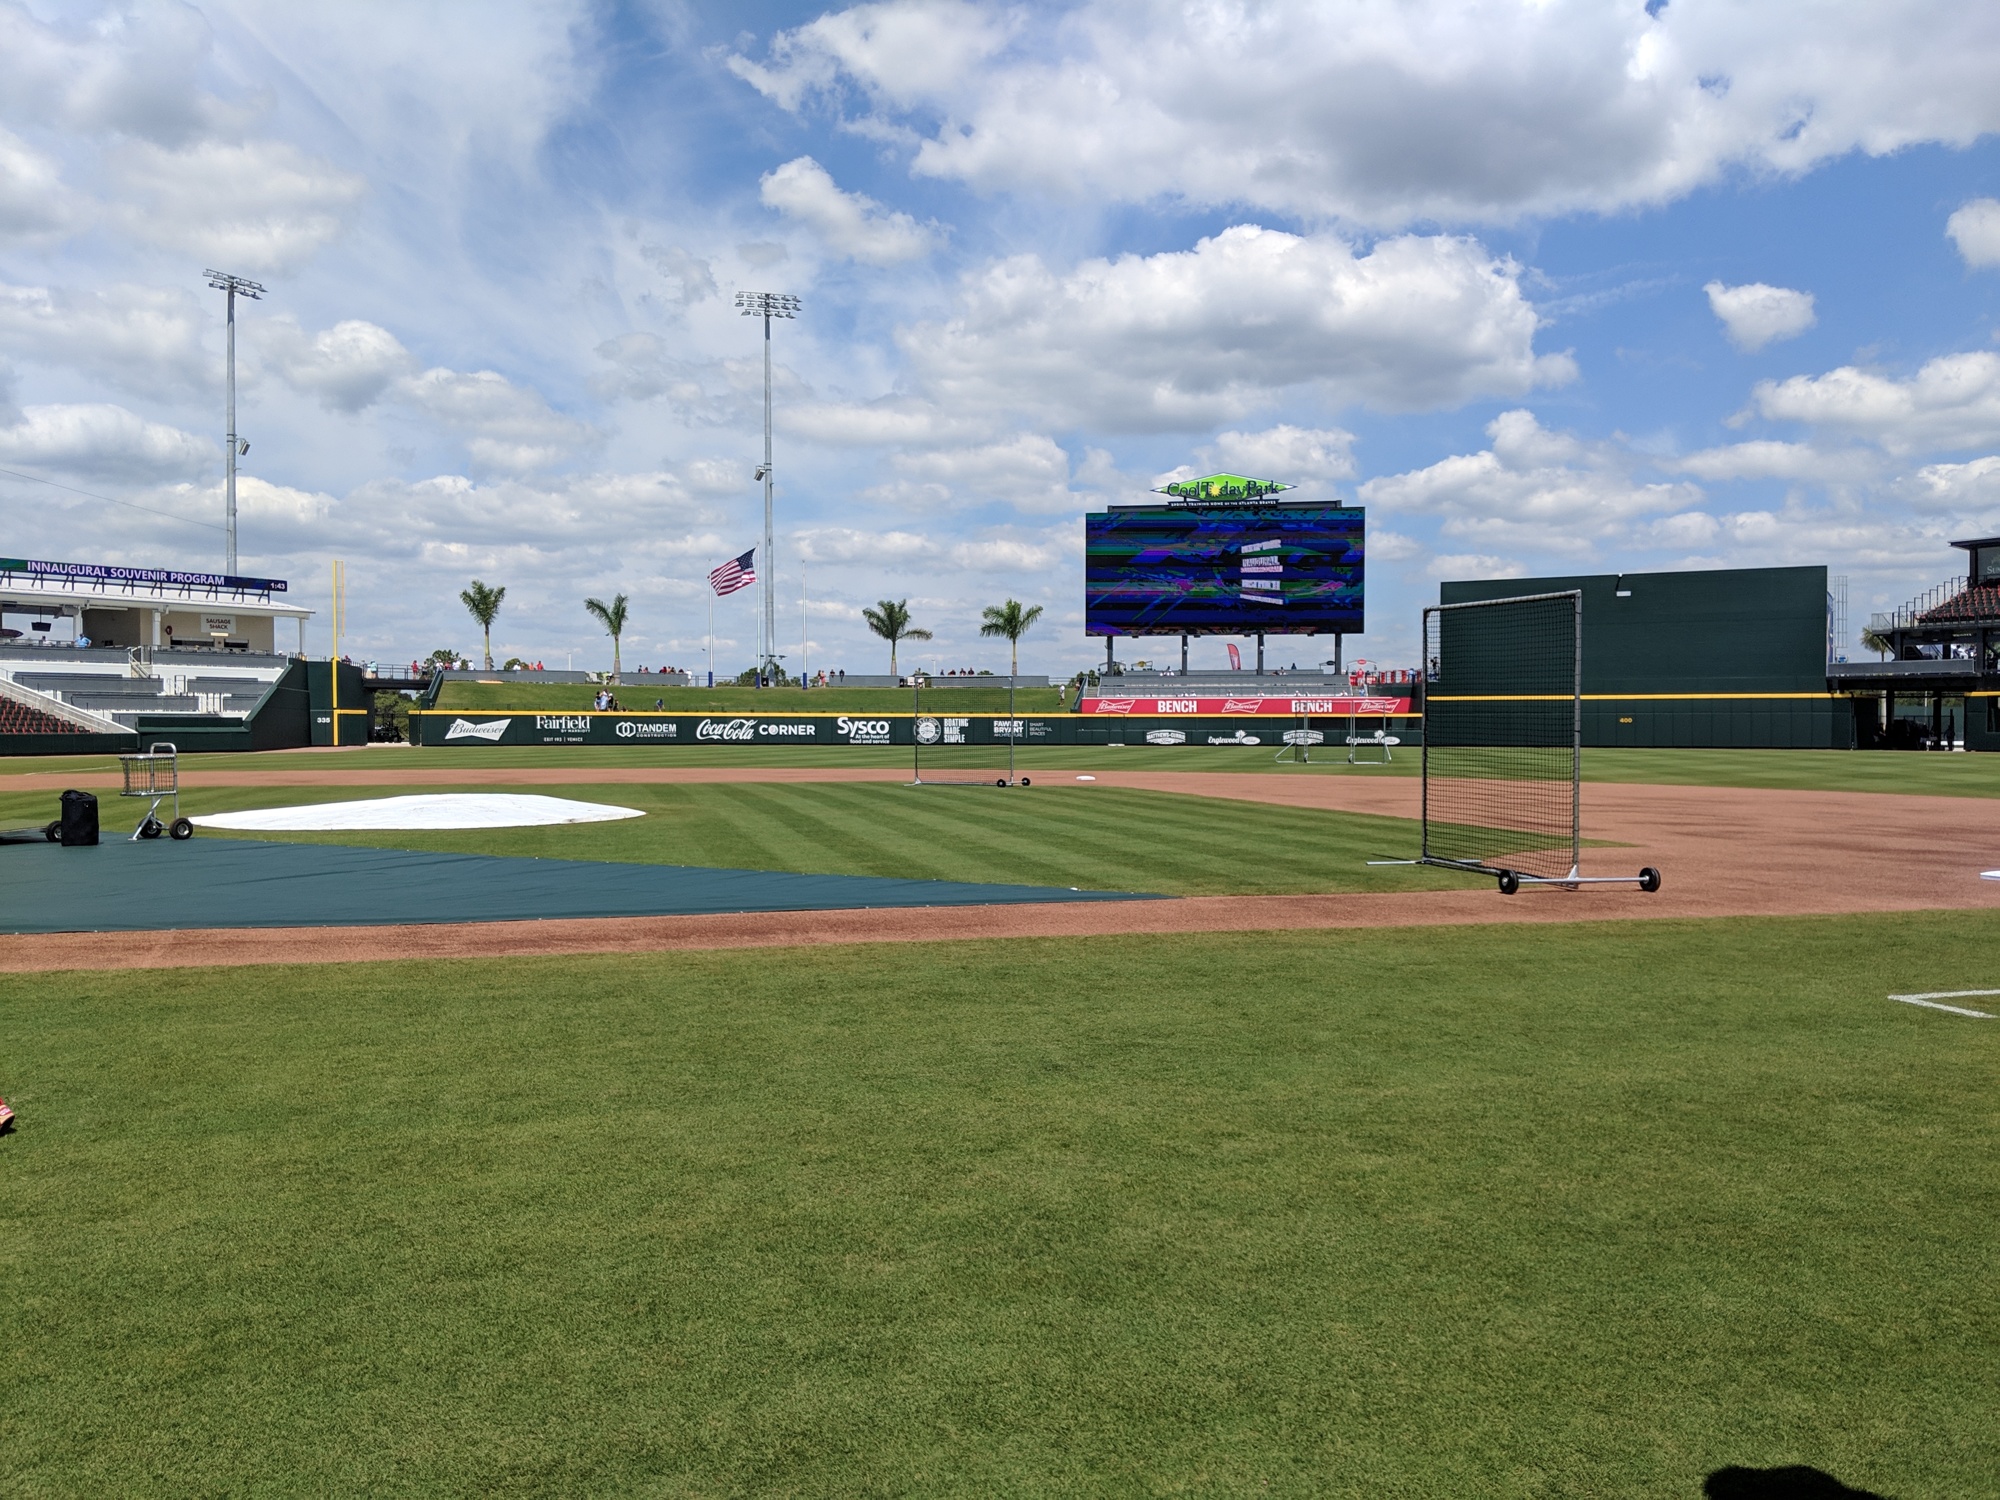 Fast Facts For CoolToday Park: New Home to Braves Baseball in Florida